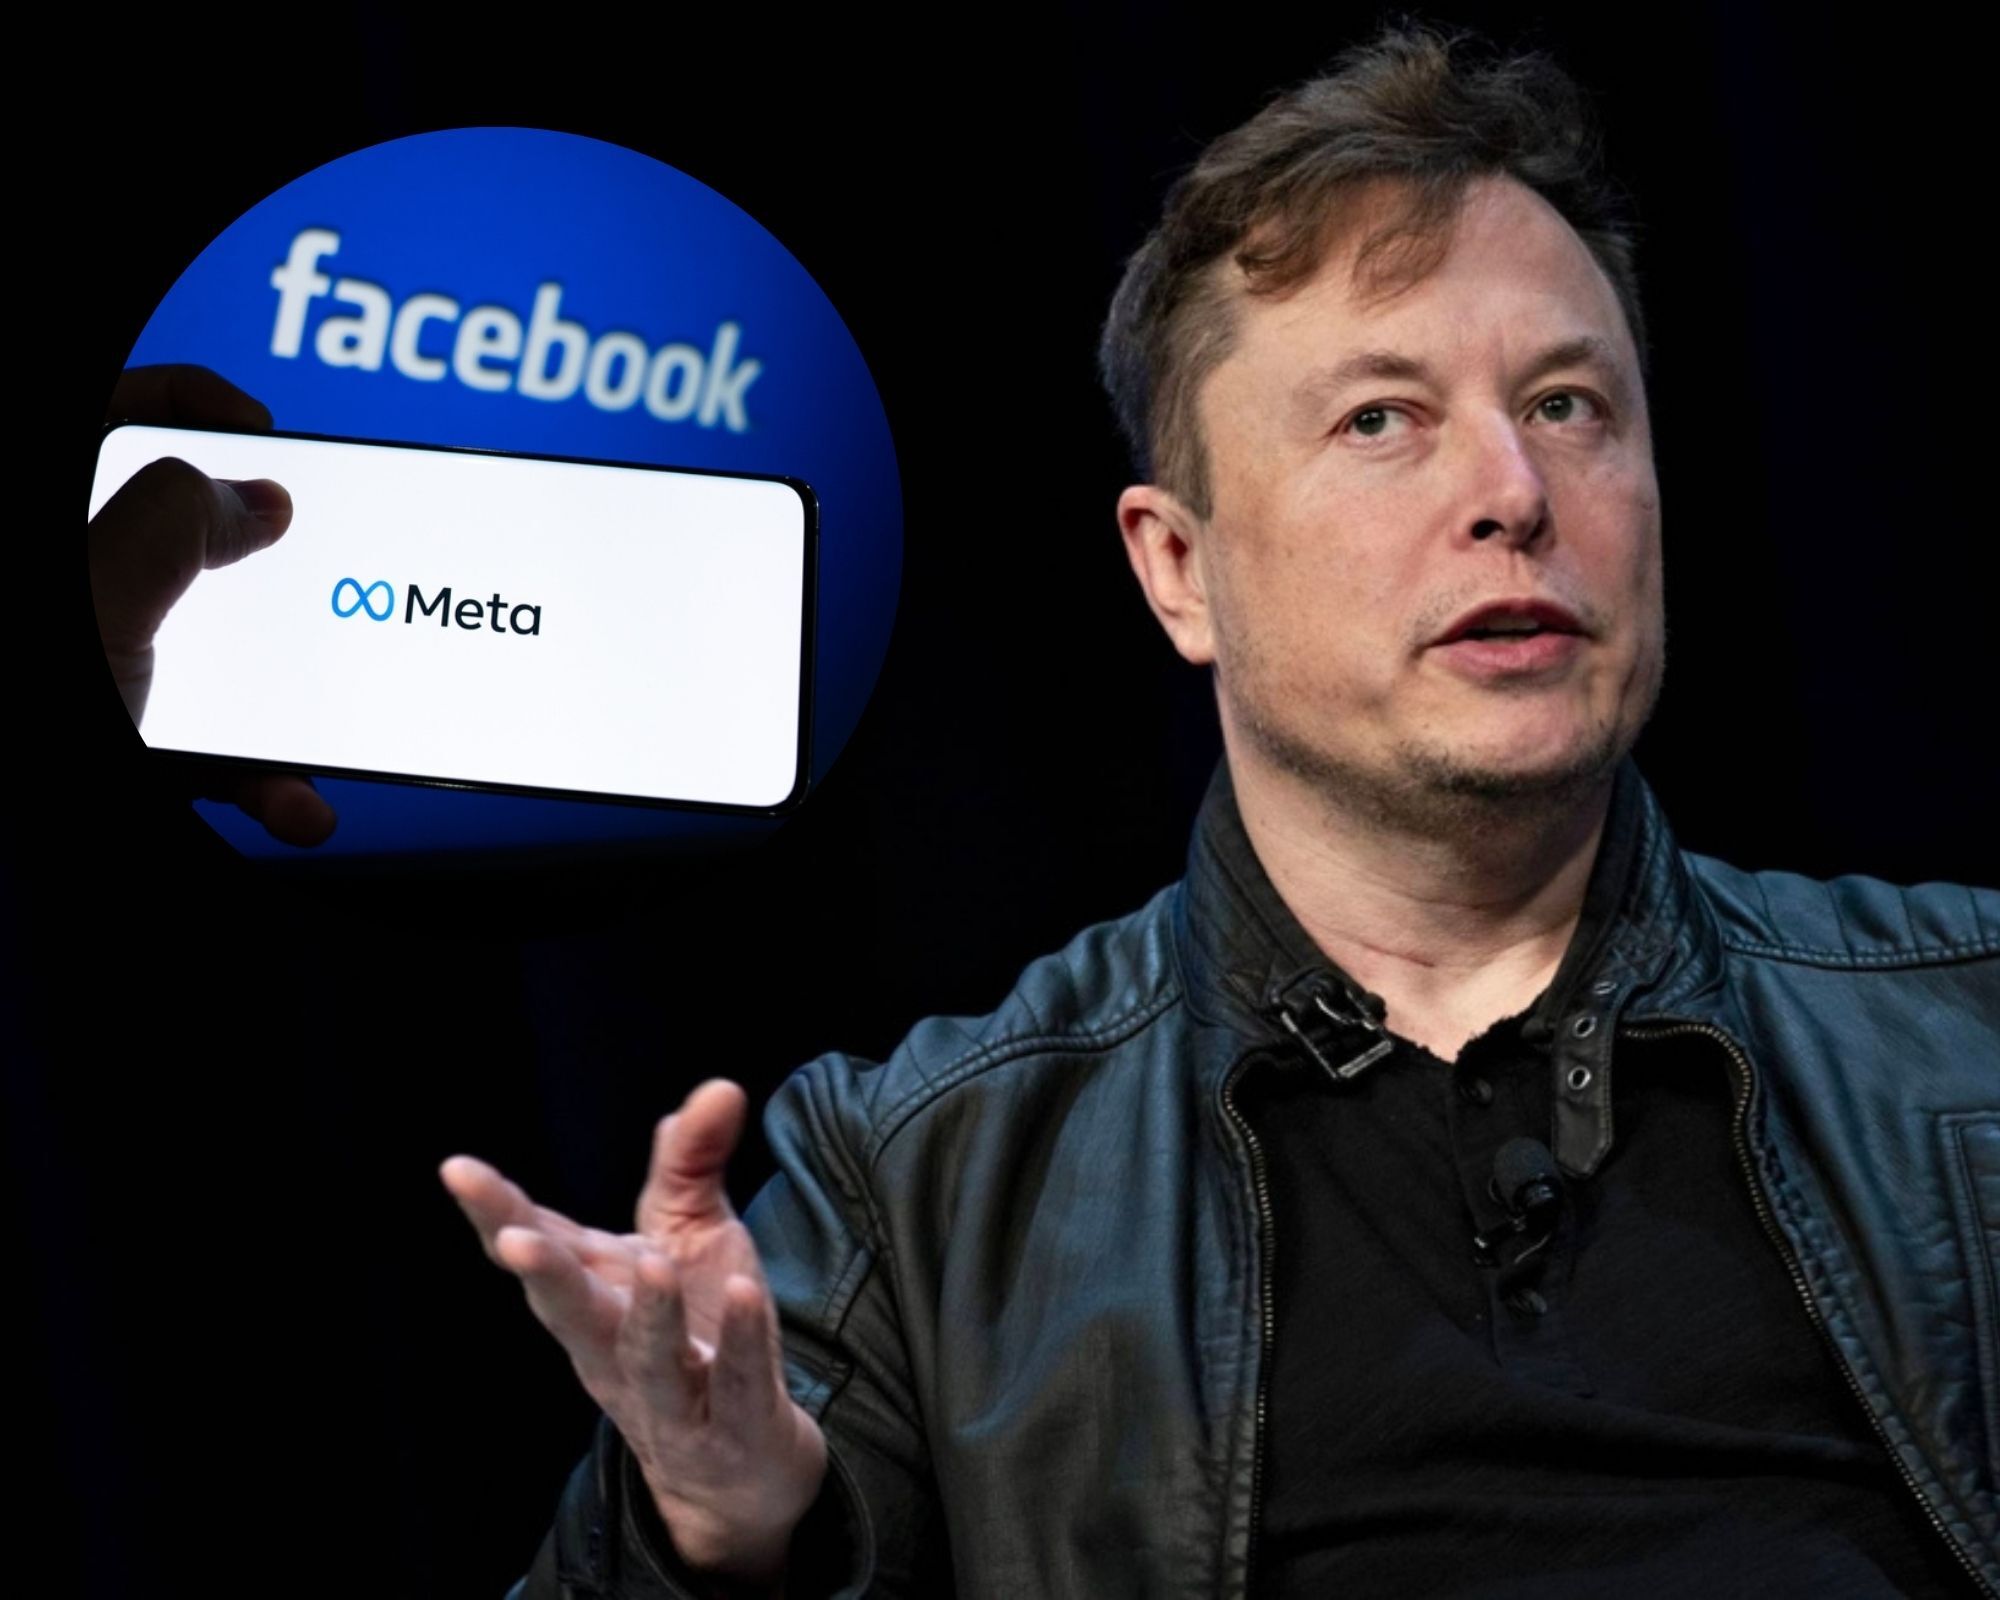 Elon Musk Has Hilarious Response To Facebook and Instagram Going Down